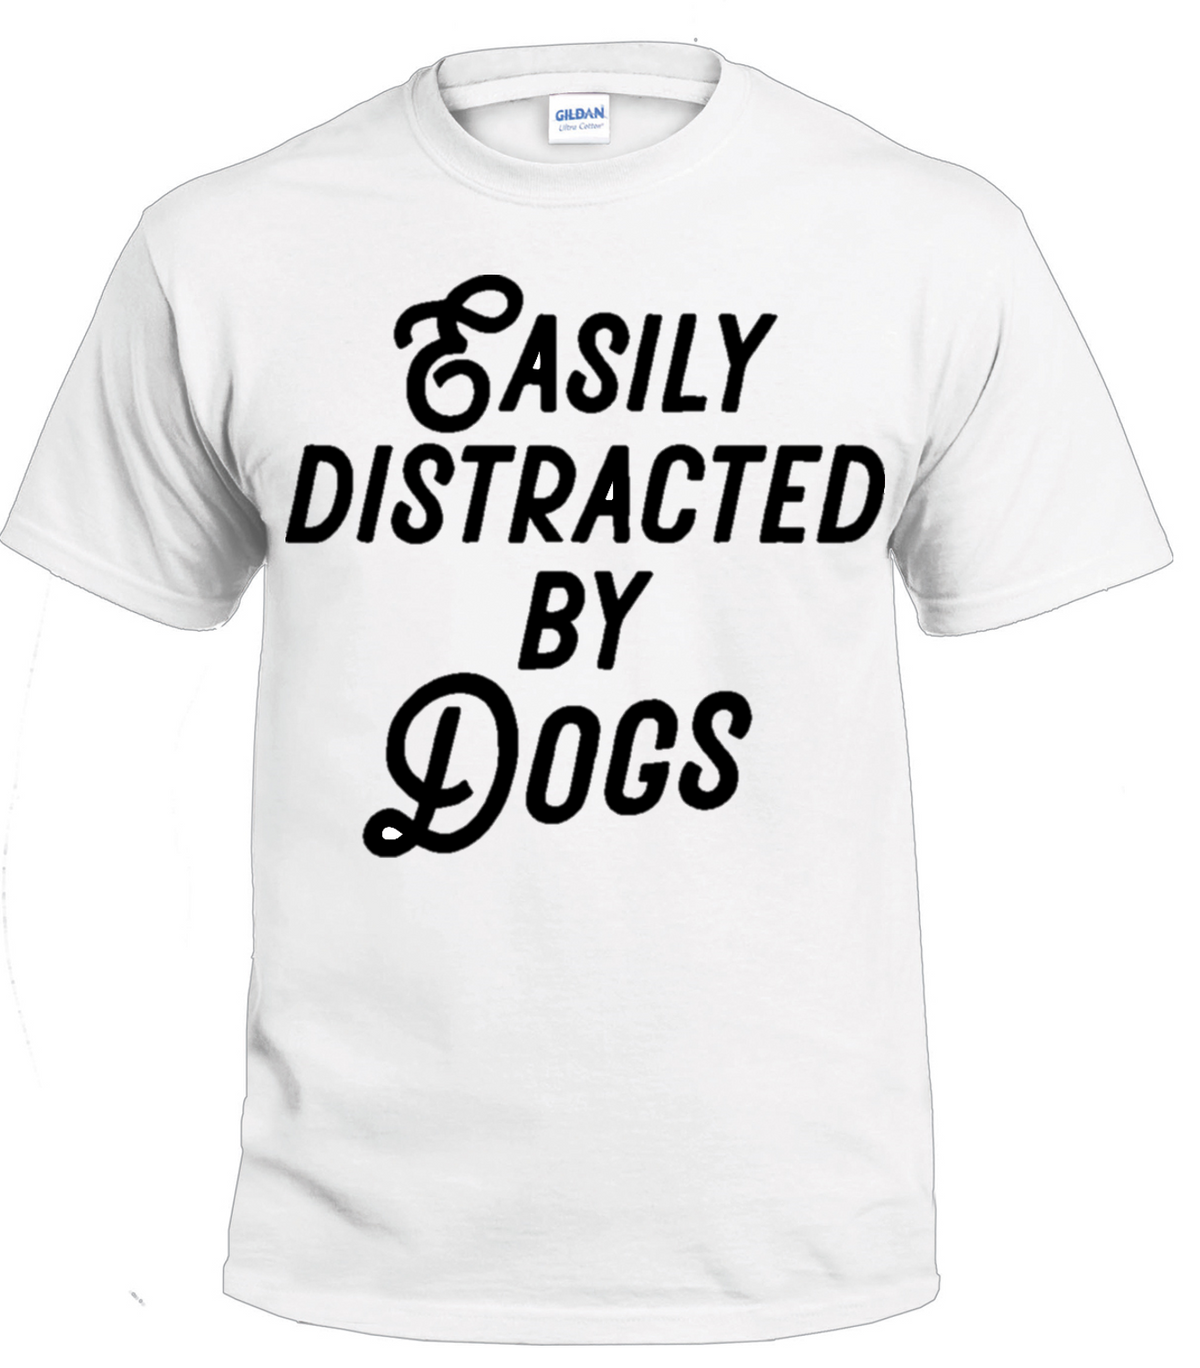 Easily Distracted by Dogs t-shirt